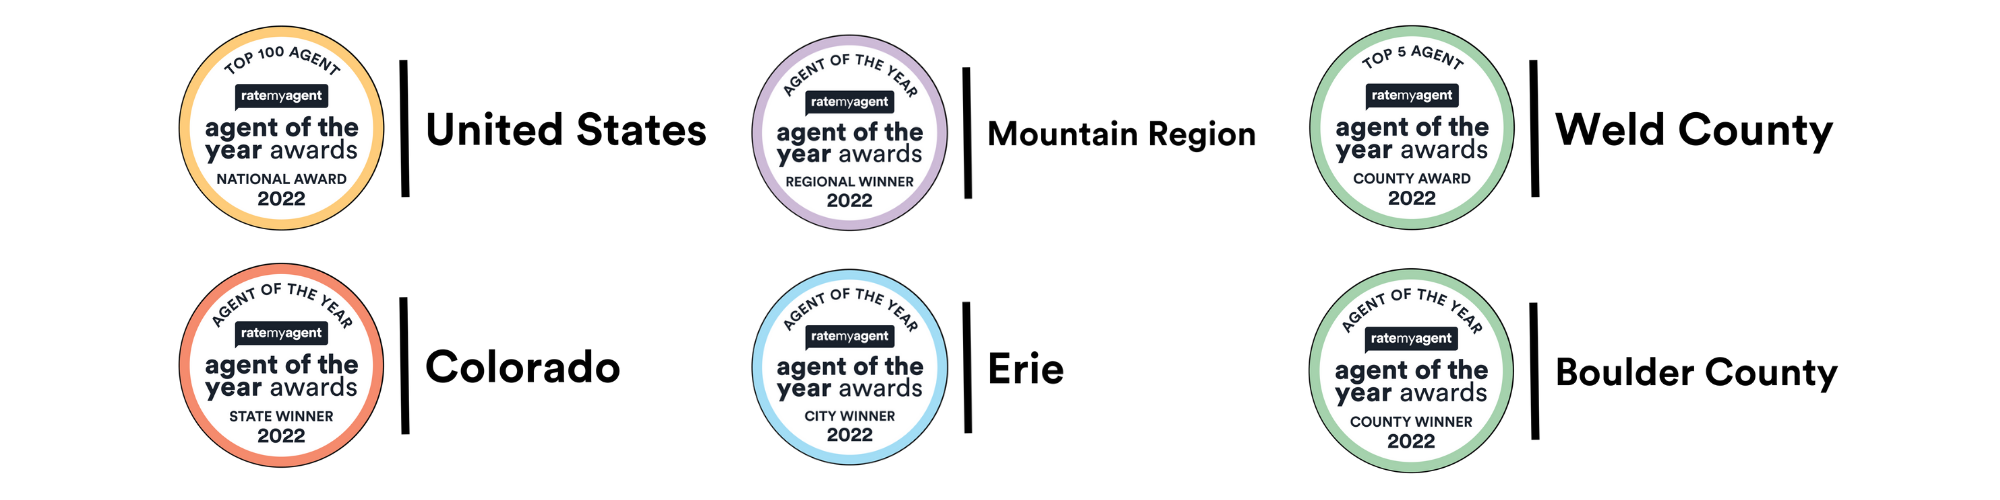 Brie Fowler Rate My Agent 2022 Awards: Agent of the Year, Top US Agent, Agent of the Year Mountain Region, Agent of the Year City of Erie, Top Agent Weld County, Agent of the Year Boulder County, Agent of the Year Colorado